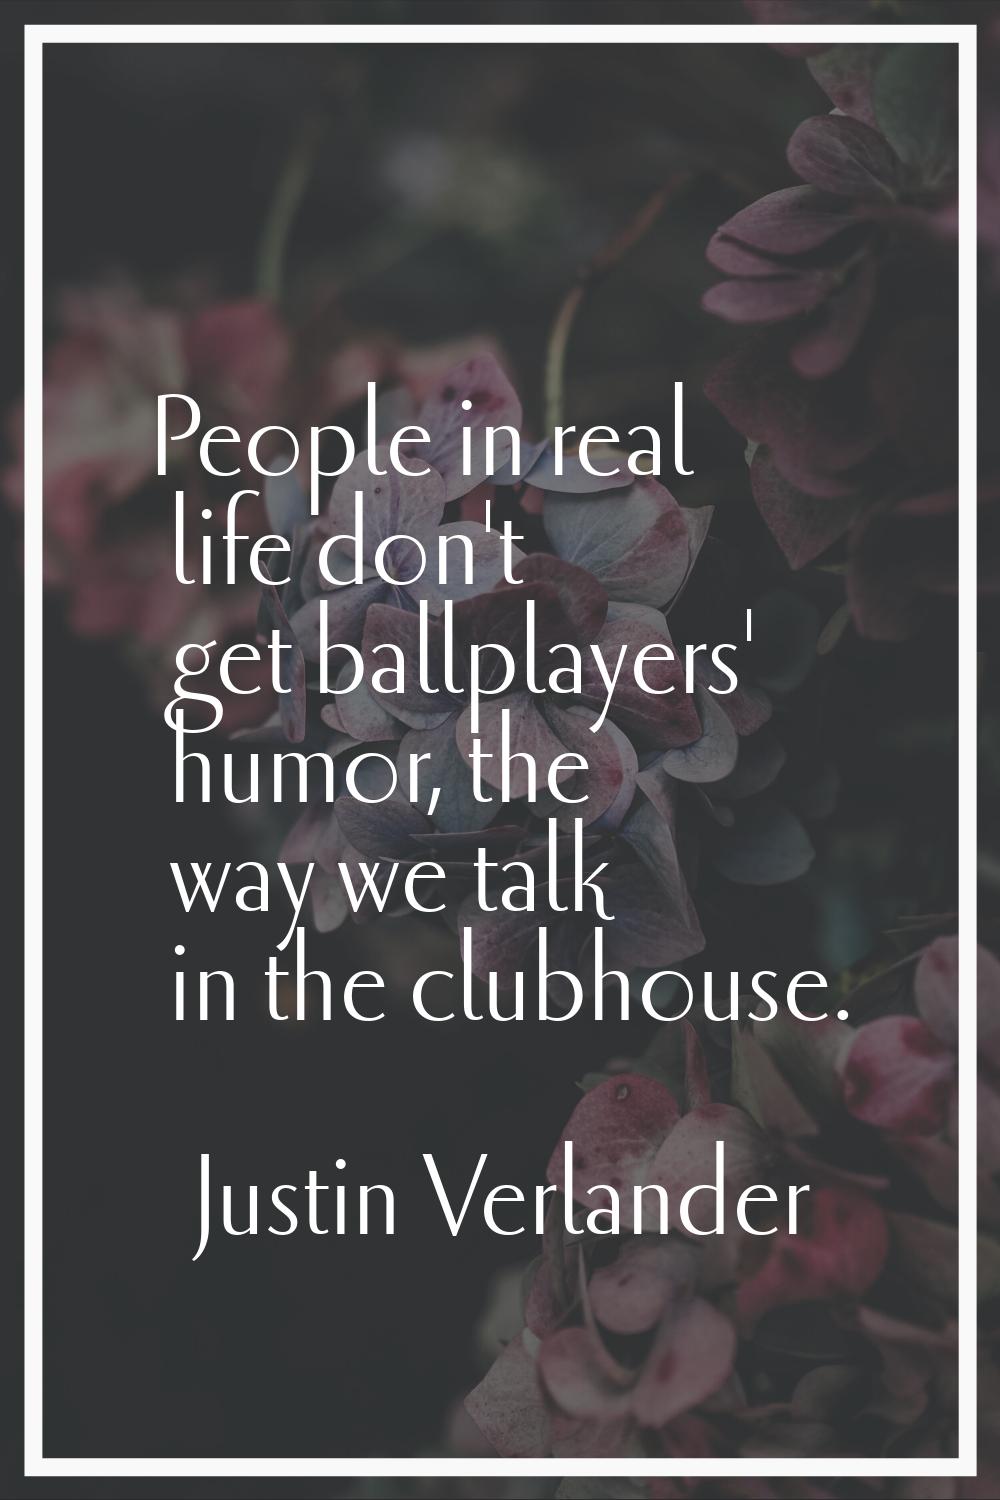 People in real life don't get ballplayers' humor, the way we talk in the clubhouse.